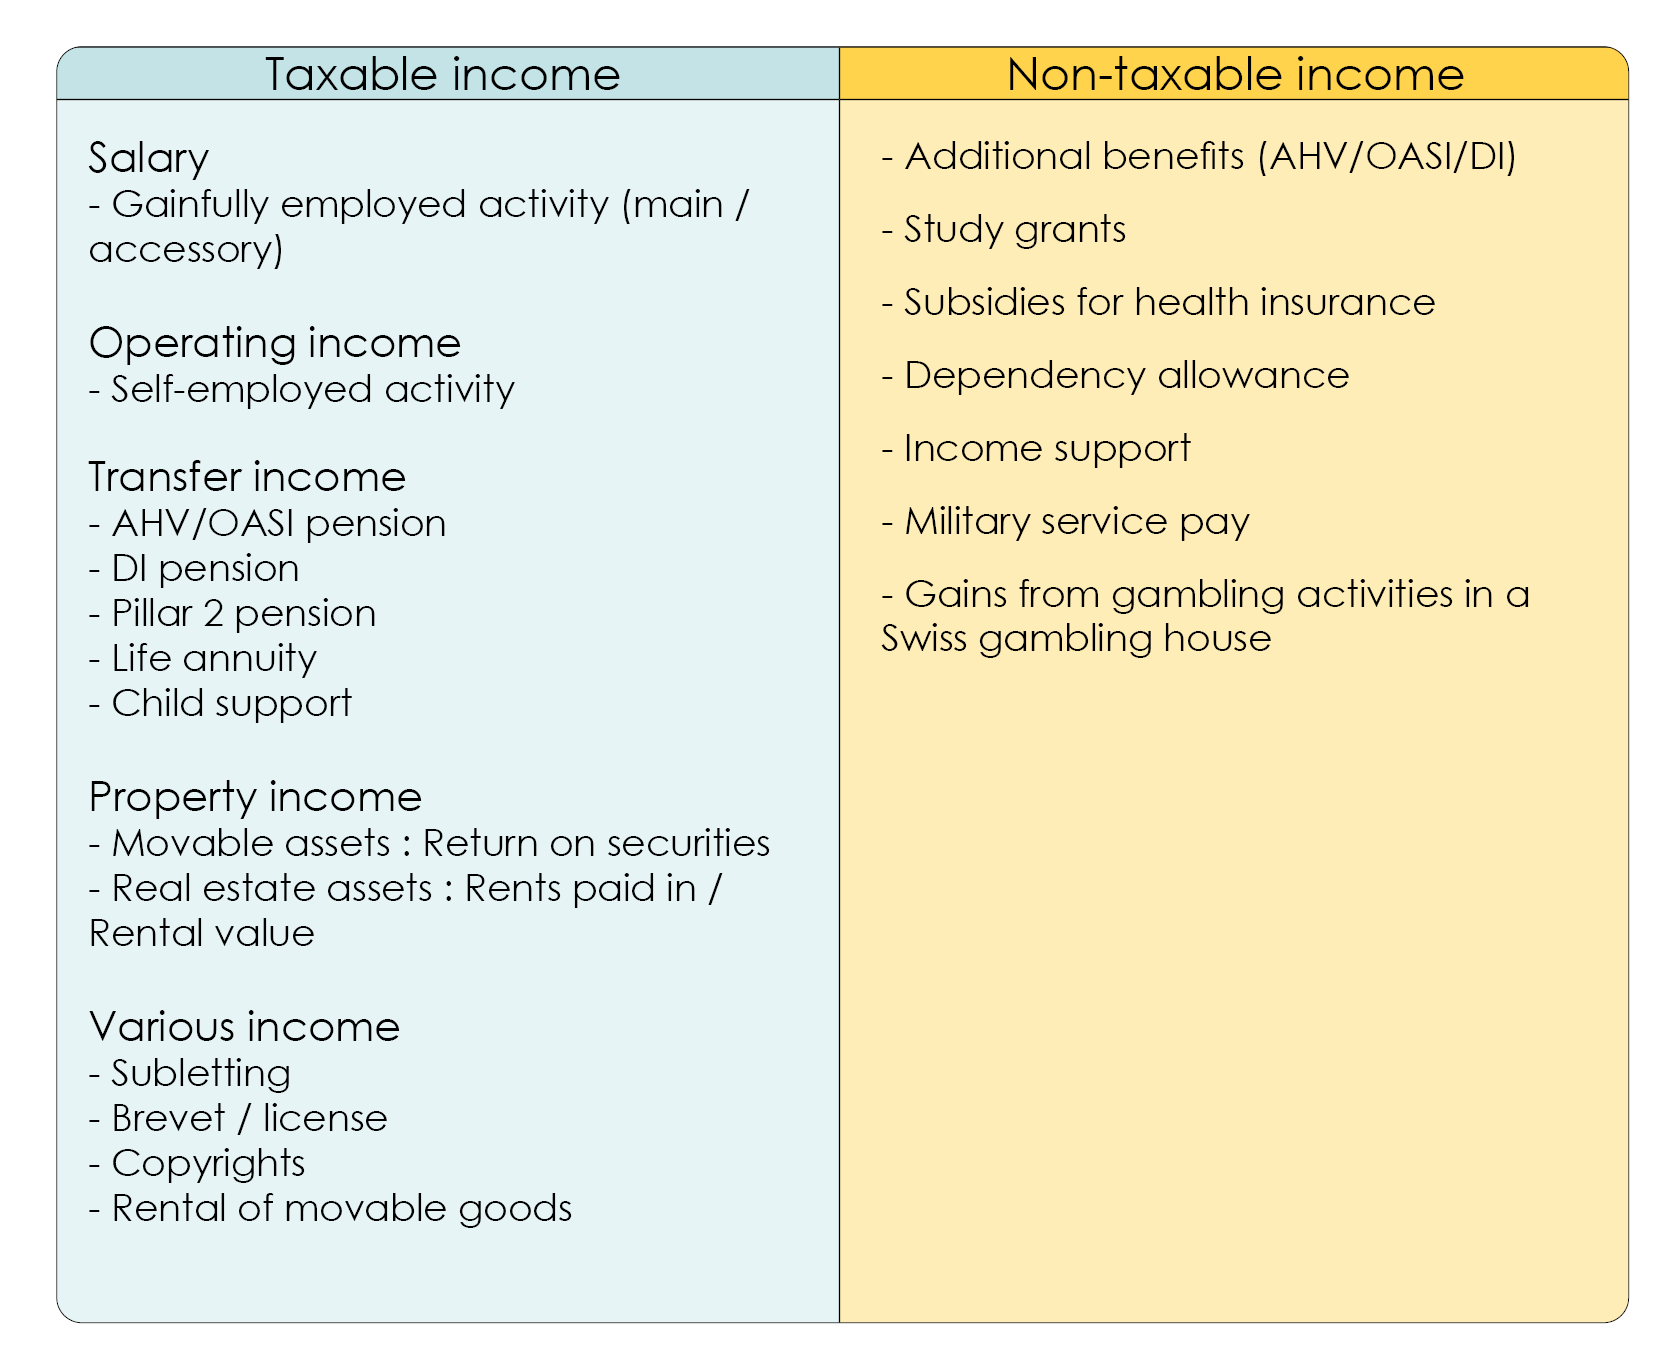 What income is subject to income tax and what income is exempt from income tax to determine taxable income 